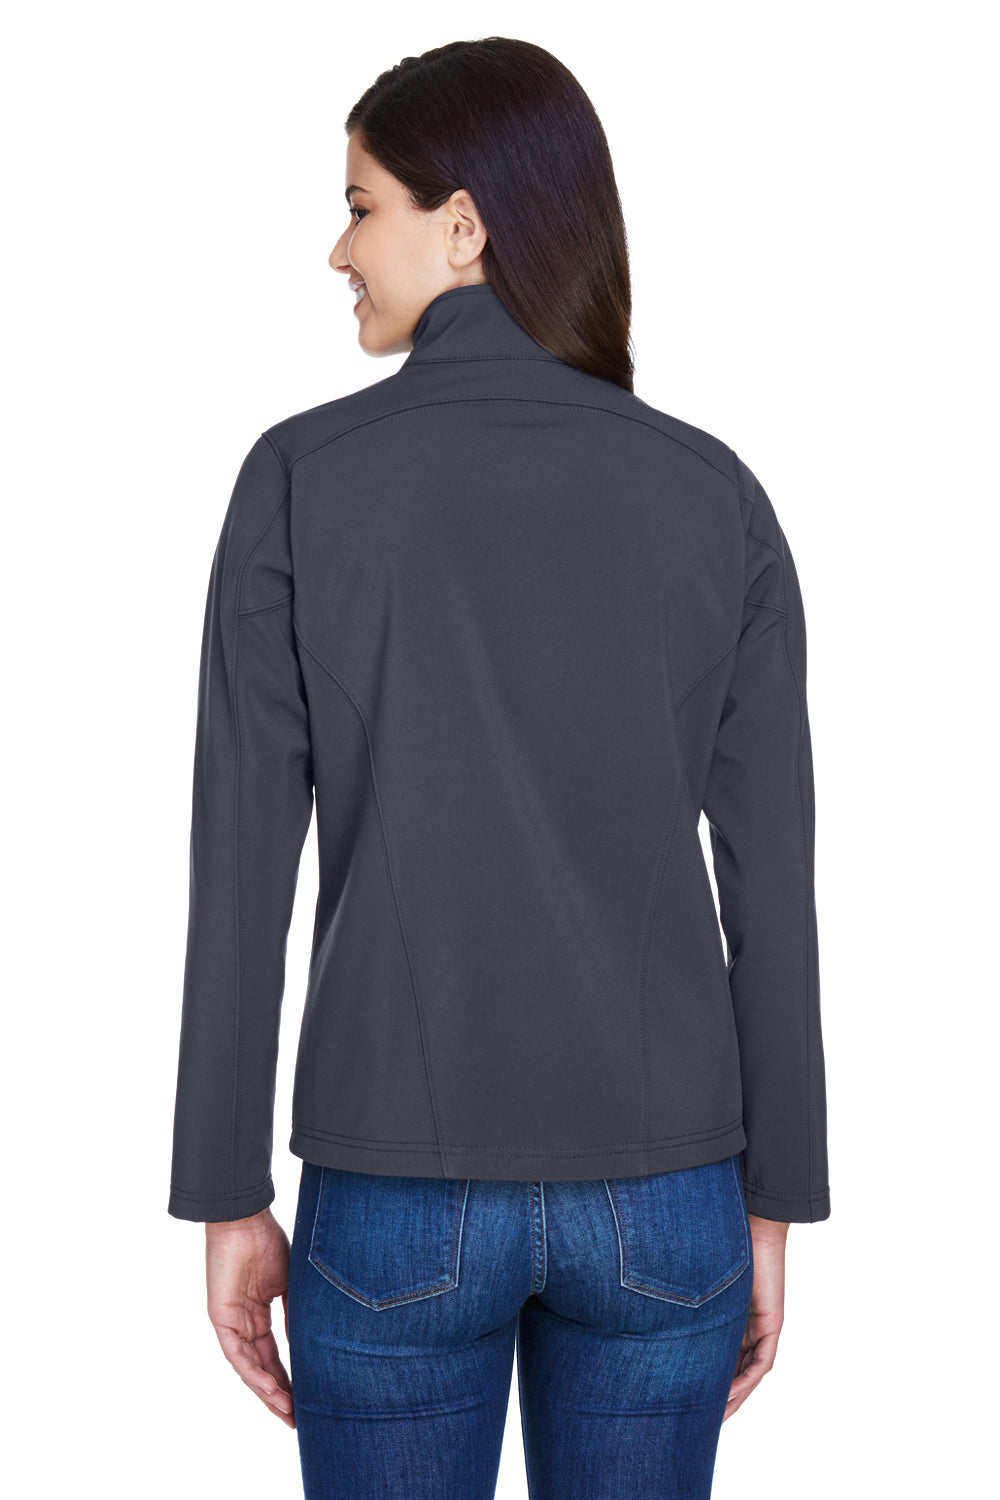 Core 365 78184 Womens Cruise Water Resistant Full Zip Jacket Carbon Grey Back